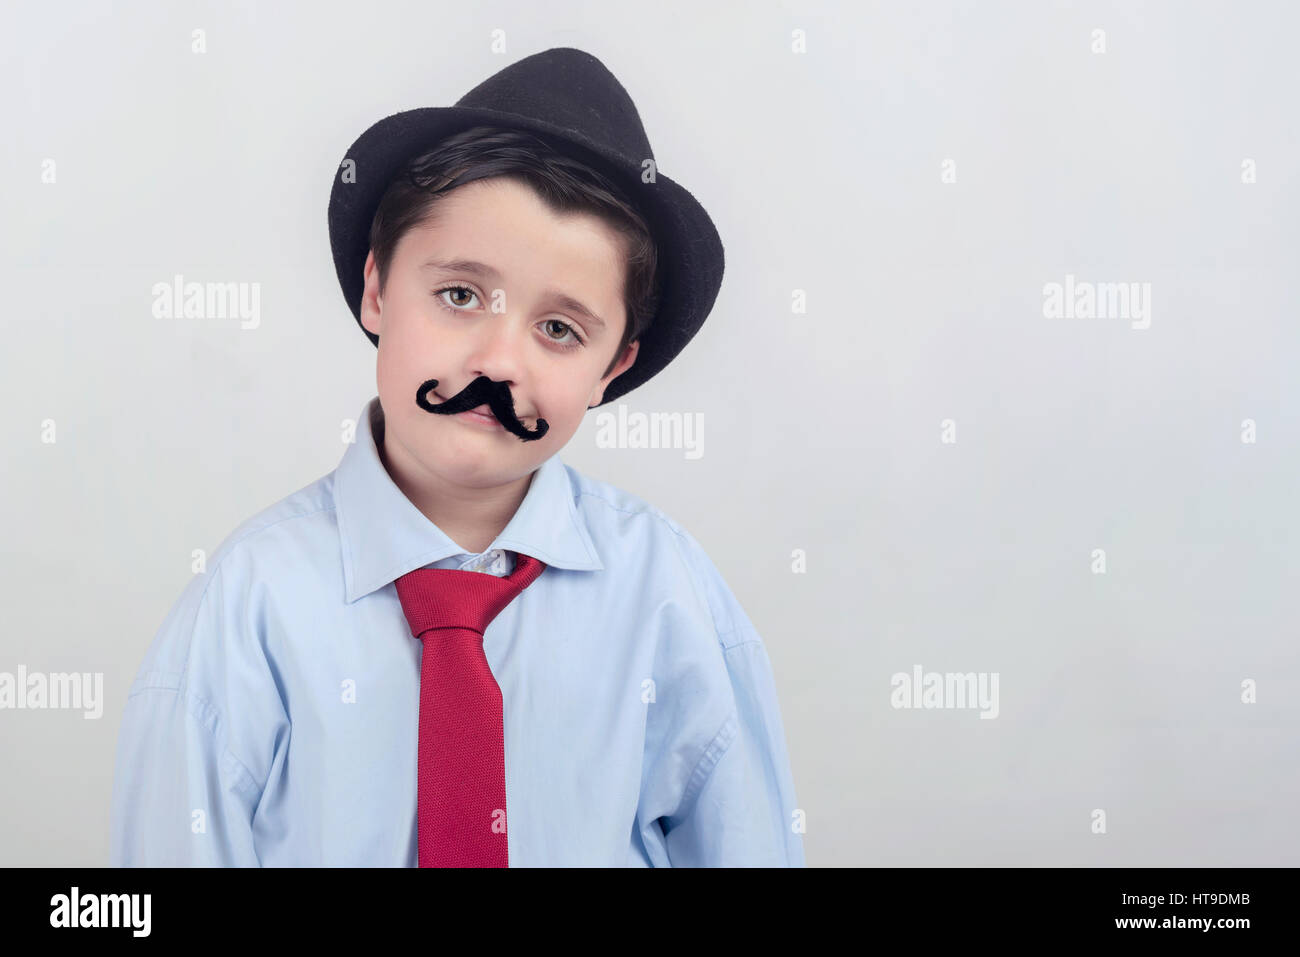 Funny boy with fake mustache and tie Stock Photo